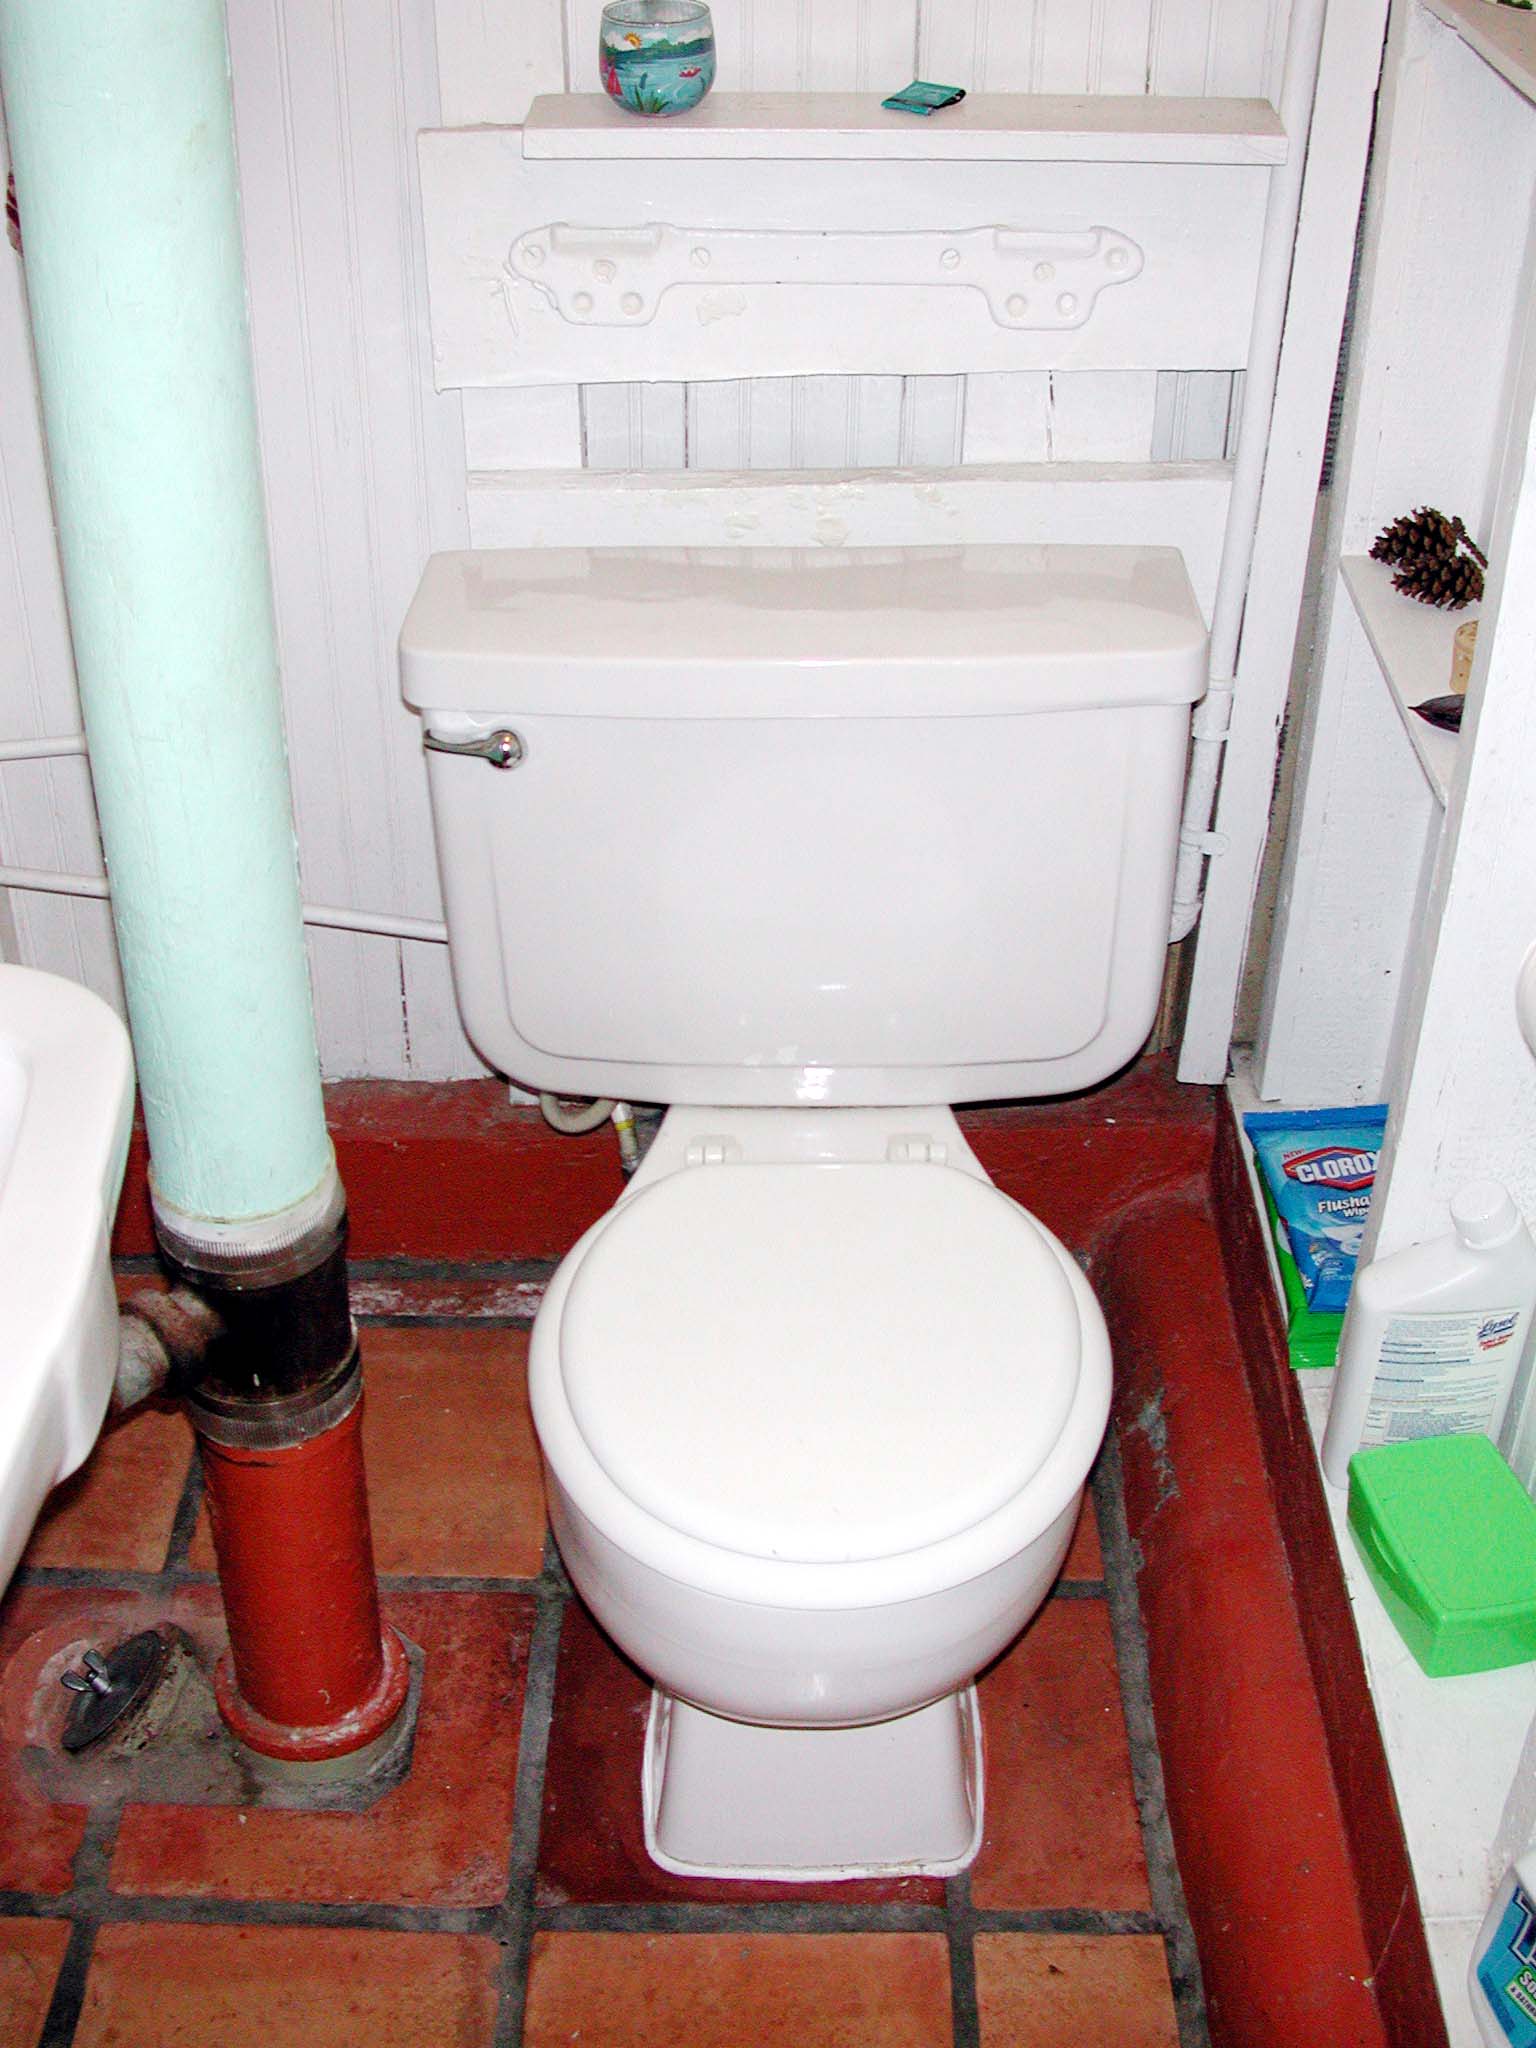 a white toilet in a bathroom next to a brick floor